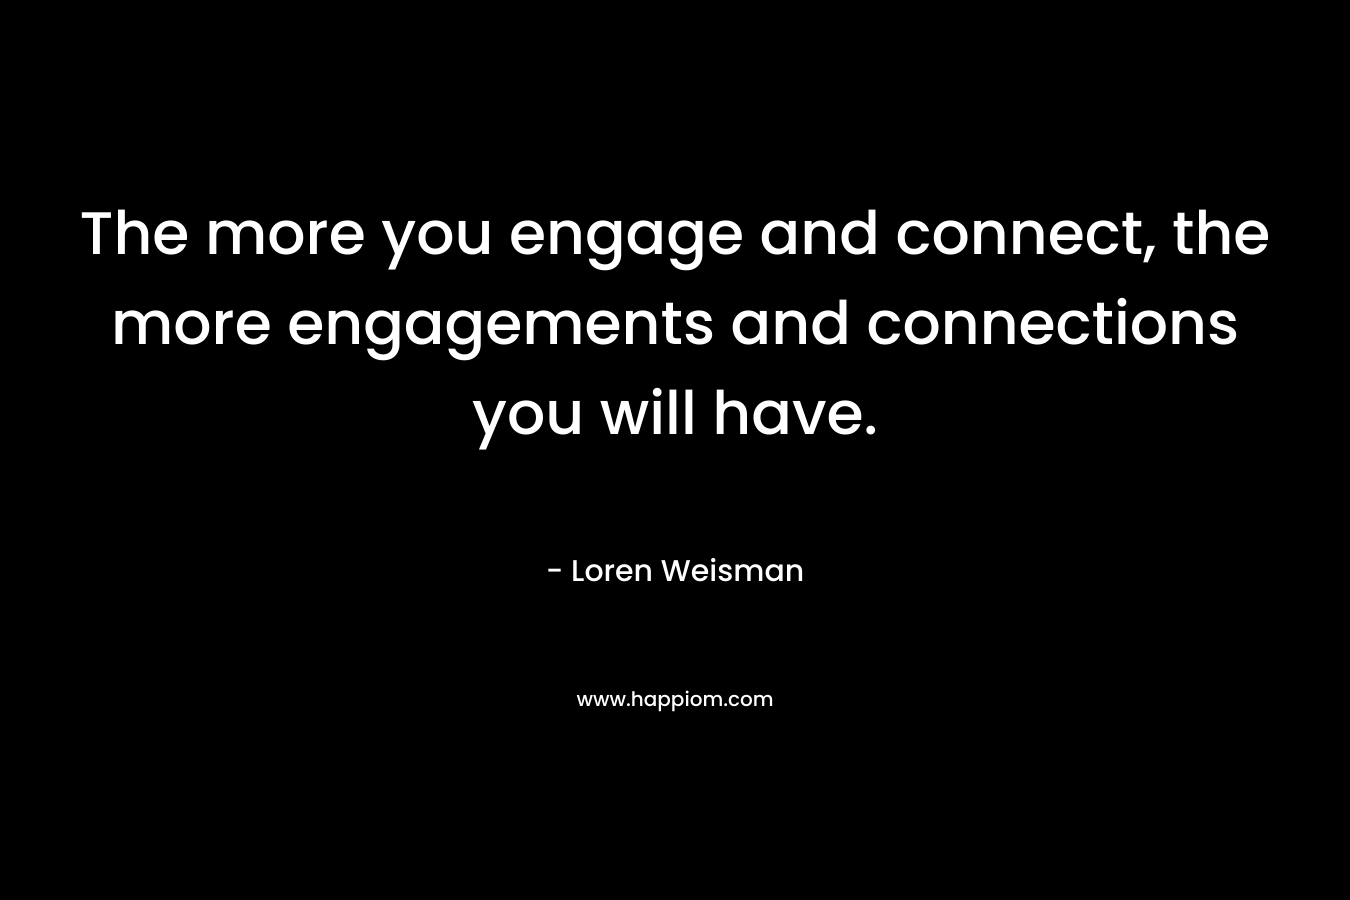 The more you engage and connect, the more engagements and connections you will have.